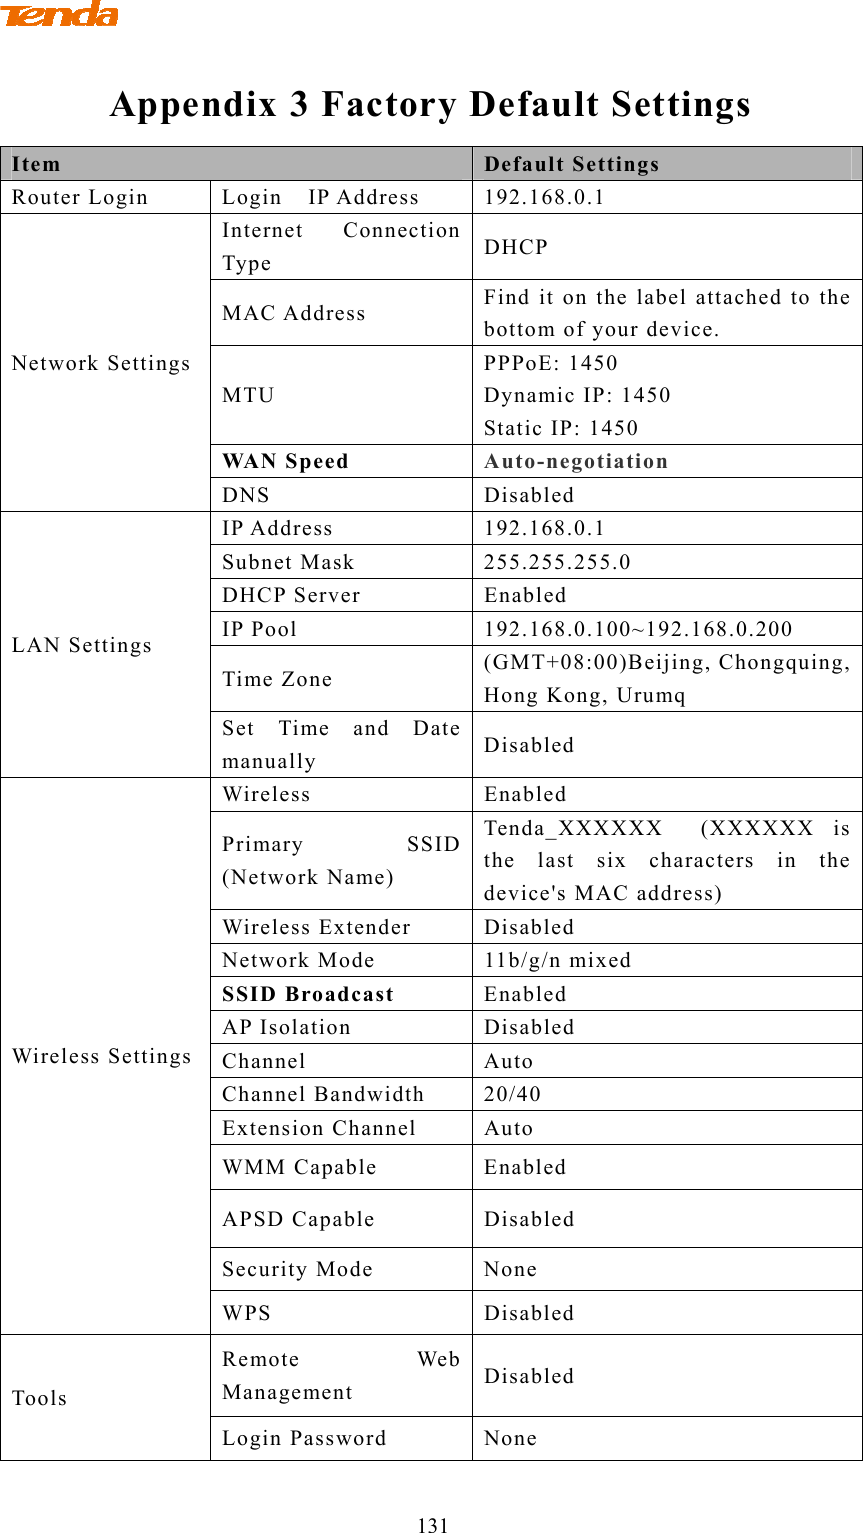                                   131 Appendix 3 Factory Default Settings Item  Default Settings Router Login  Login  IP Address  192.168.0.1 Network SettingsInternet Connection Type  DHCP MAC Address  Find it on the label attached to the bottom of your device. MTU PPPoE: 1450 Dynamic IP: 1450 Static IP: 1450 WAN Speed Auto-negotiation DNS Disabled LAN Settings IP Address  192.168.0.1 Subnet Mask  255.255.255.0 DHCP Server  Enabled IP Pool  192.168.0.100~192.168.0.200 Time Zone  (GMT+08:00)Beijing, Chongquing, Hong Kong, Urumq Set Time and Date manually  Disabled Wireless SettingsWireless Enabled Primary SSID (Network Name) Tenda_XXXXXX  (XXXXXX is the last six characters in the device&apos;s MAC address) Wireless Extender  Disabled Network Mode  11b/g/n mixed SSID Broadcast Enabled AP Isolation  Disabled Channel Auto Channel Bandwidth  20/40 Extension Channel  Auto WMM Capable  Enabled APSD Capable  Disabled Security Mode  None WPS Disabled Tools Remote Web Management  Disabled Login Password  None 